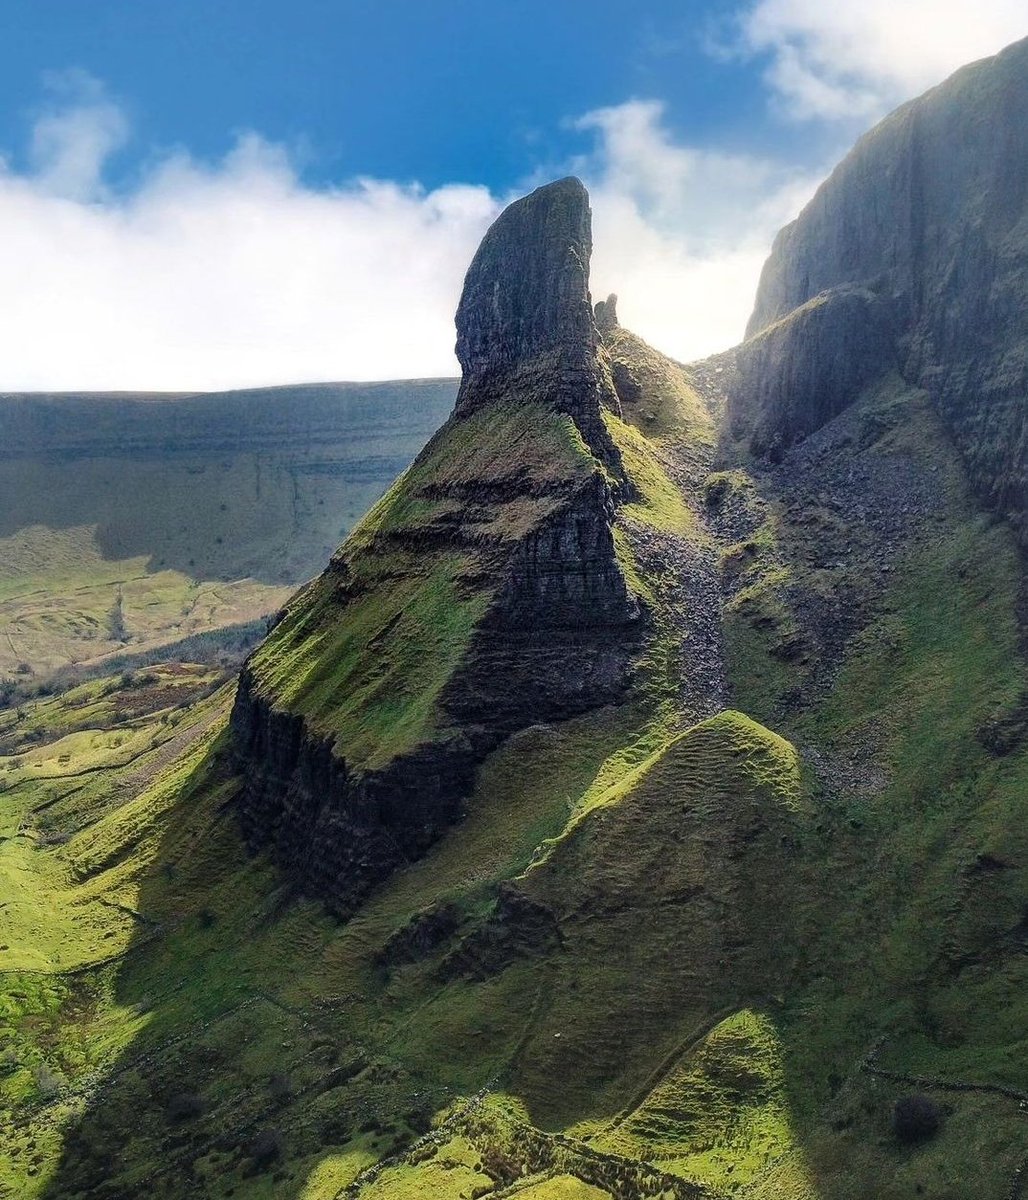 Eagles Rock, County Leitrim.

At 330m it is the highest free-standing natural rock tower on the island of Ireland.

#travelthroughireland #KeepDiscovering #irelandtravel